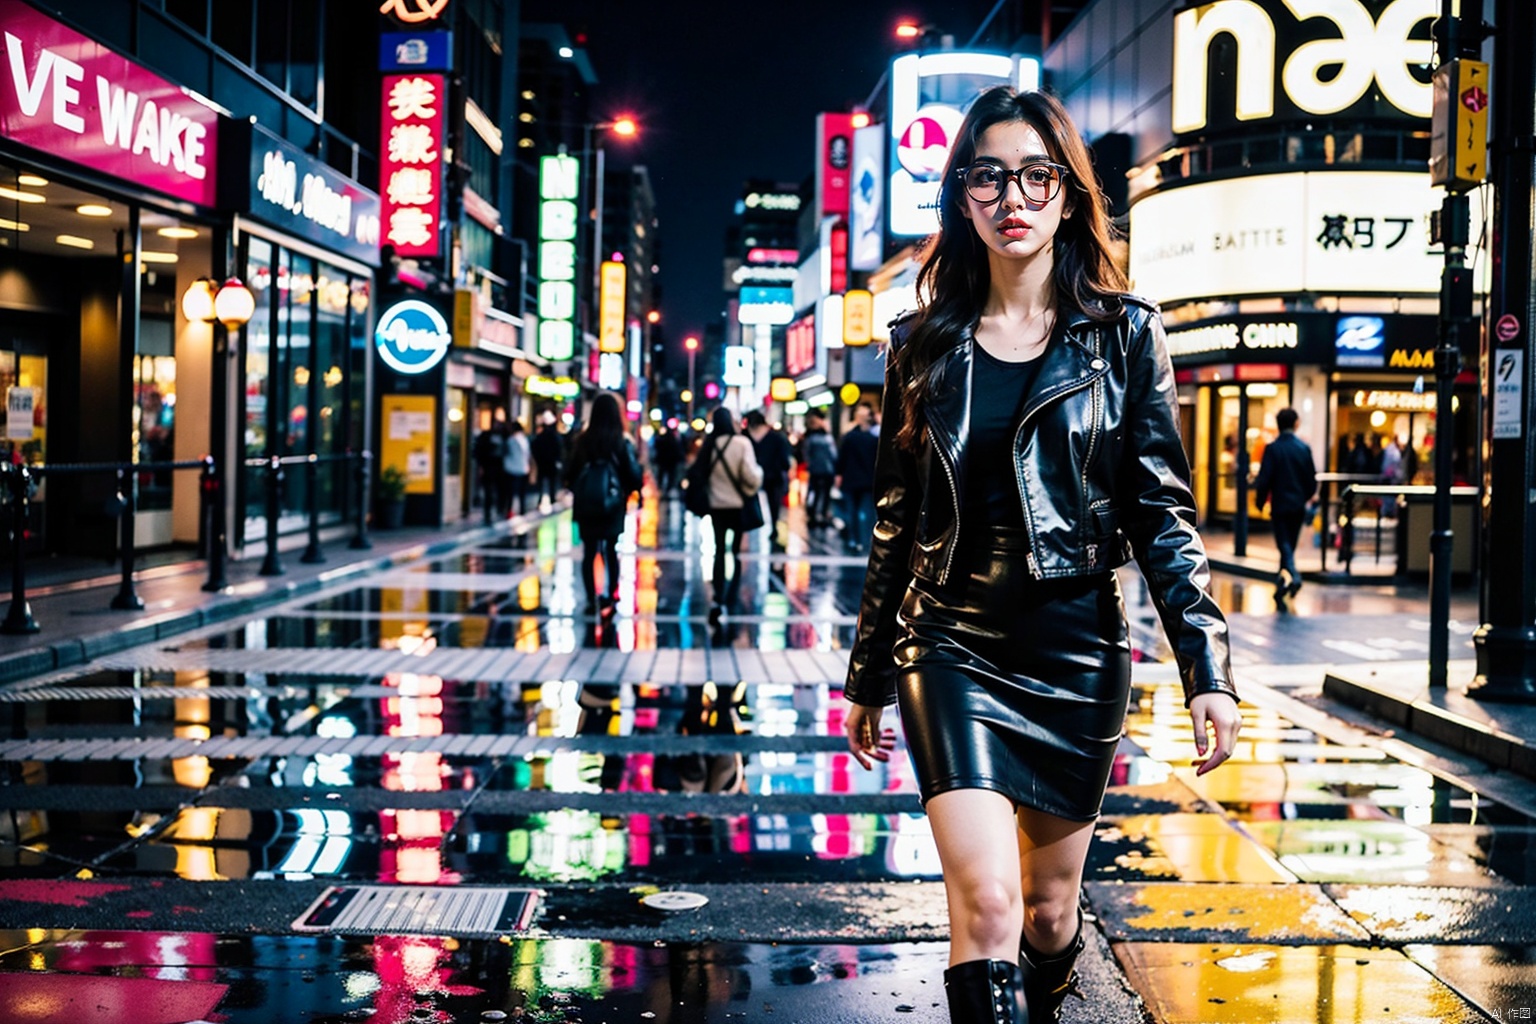  Best quality, masterpiece, half body close-up, A stylish woman walks down a Tokyo street filled with warm glowing neon and animated city signage. She wears a black leather jacket, a long red dress, and black boots, and carries a black purse. She wears sunglasses and red lipstick. She walks confidently and casually. The street is damp and reflective, creating a mirror effect of the colorful lights. Many pedestrians walk about.